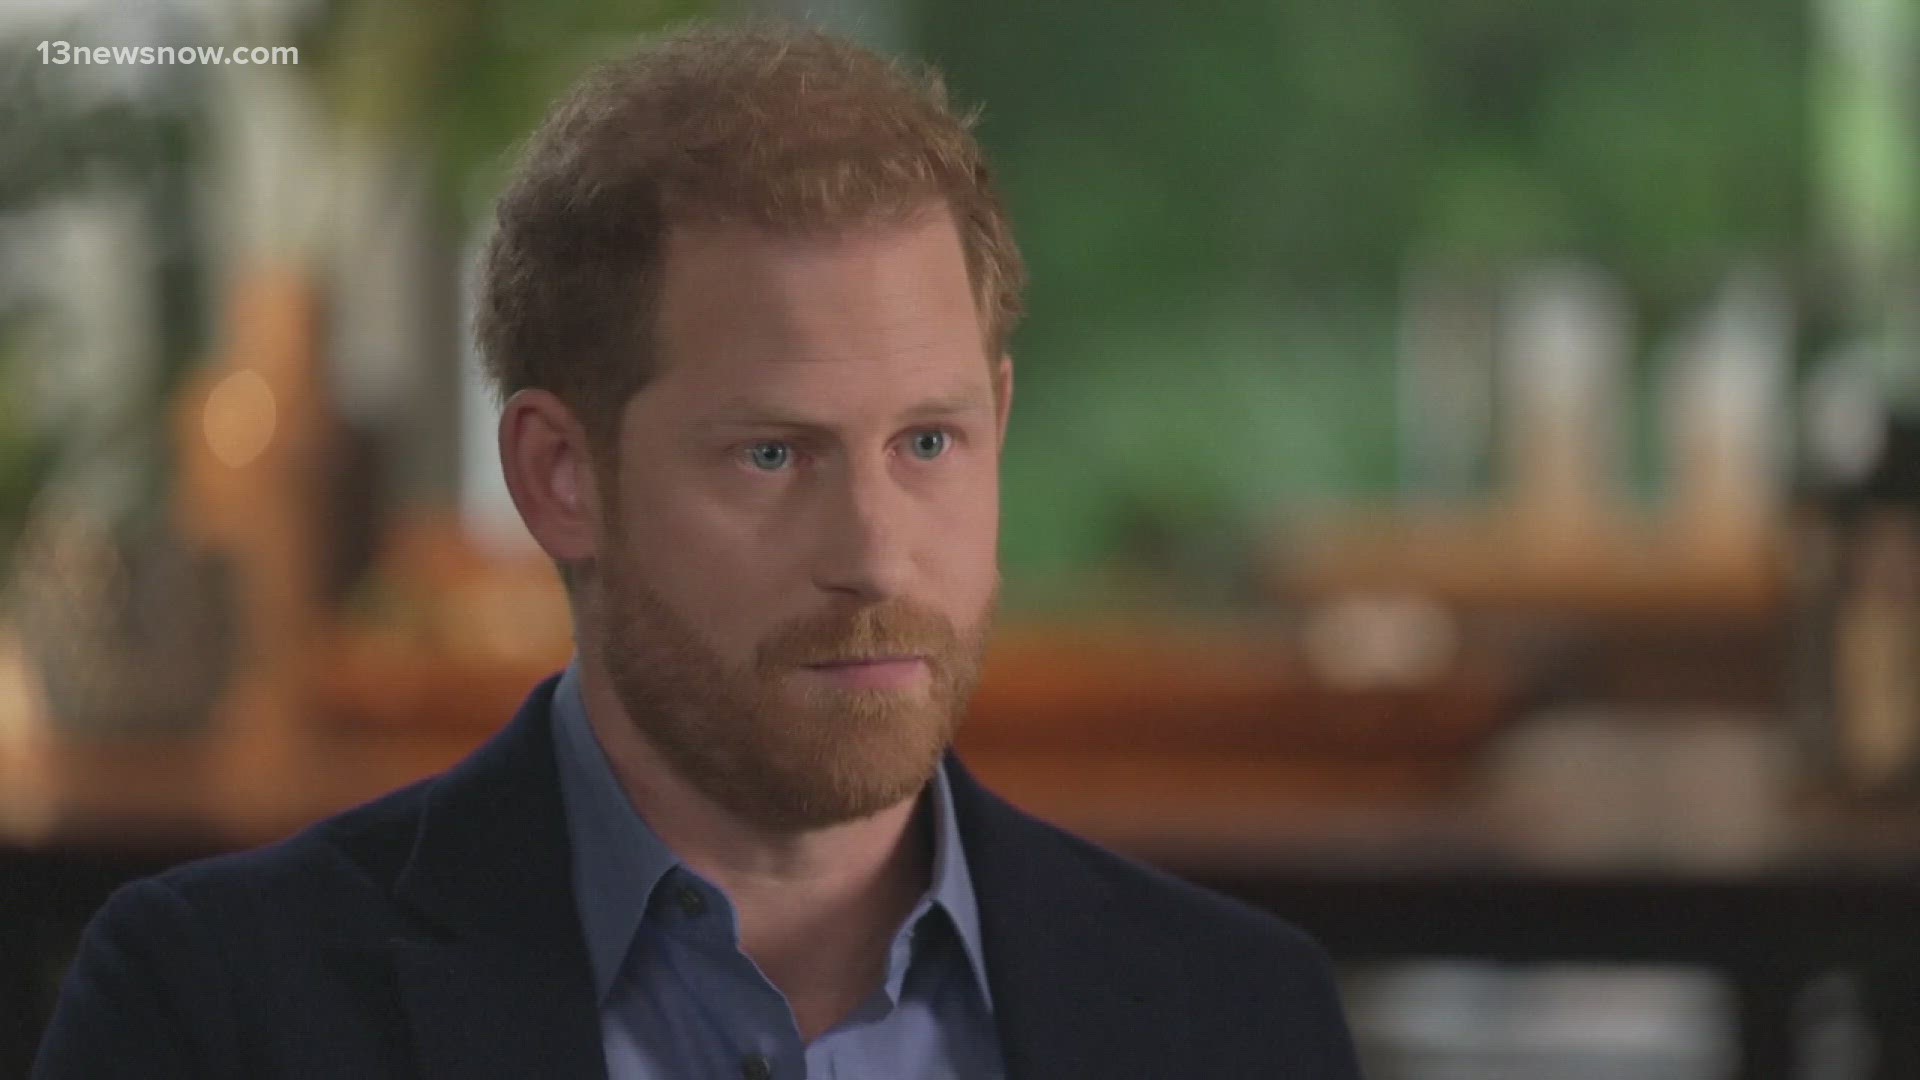 Prince Harry accused the Mirror newspaper group of hacking his phone and hiring private investigators for articles written between 1996 and 2011.